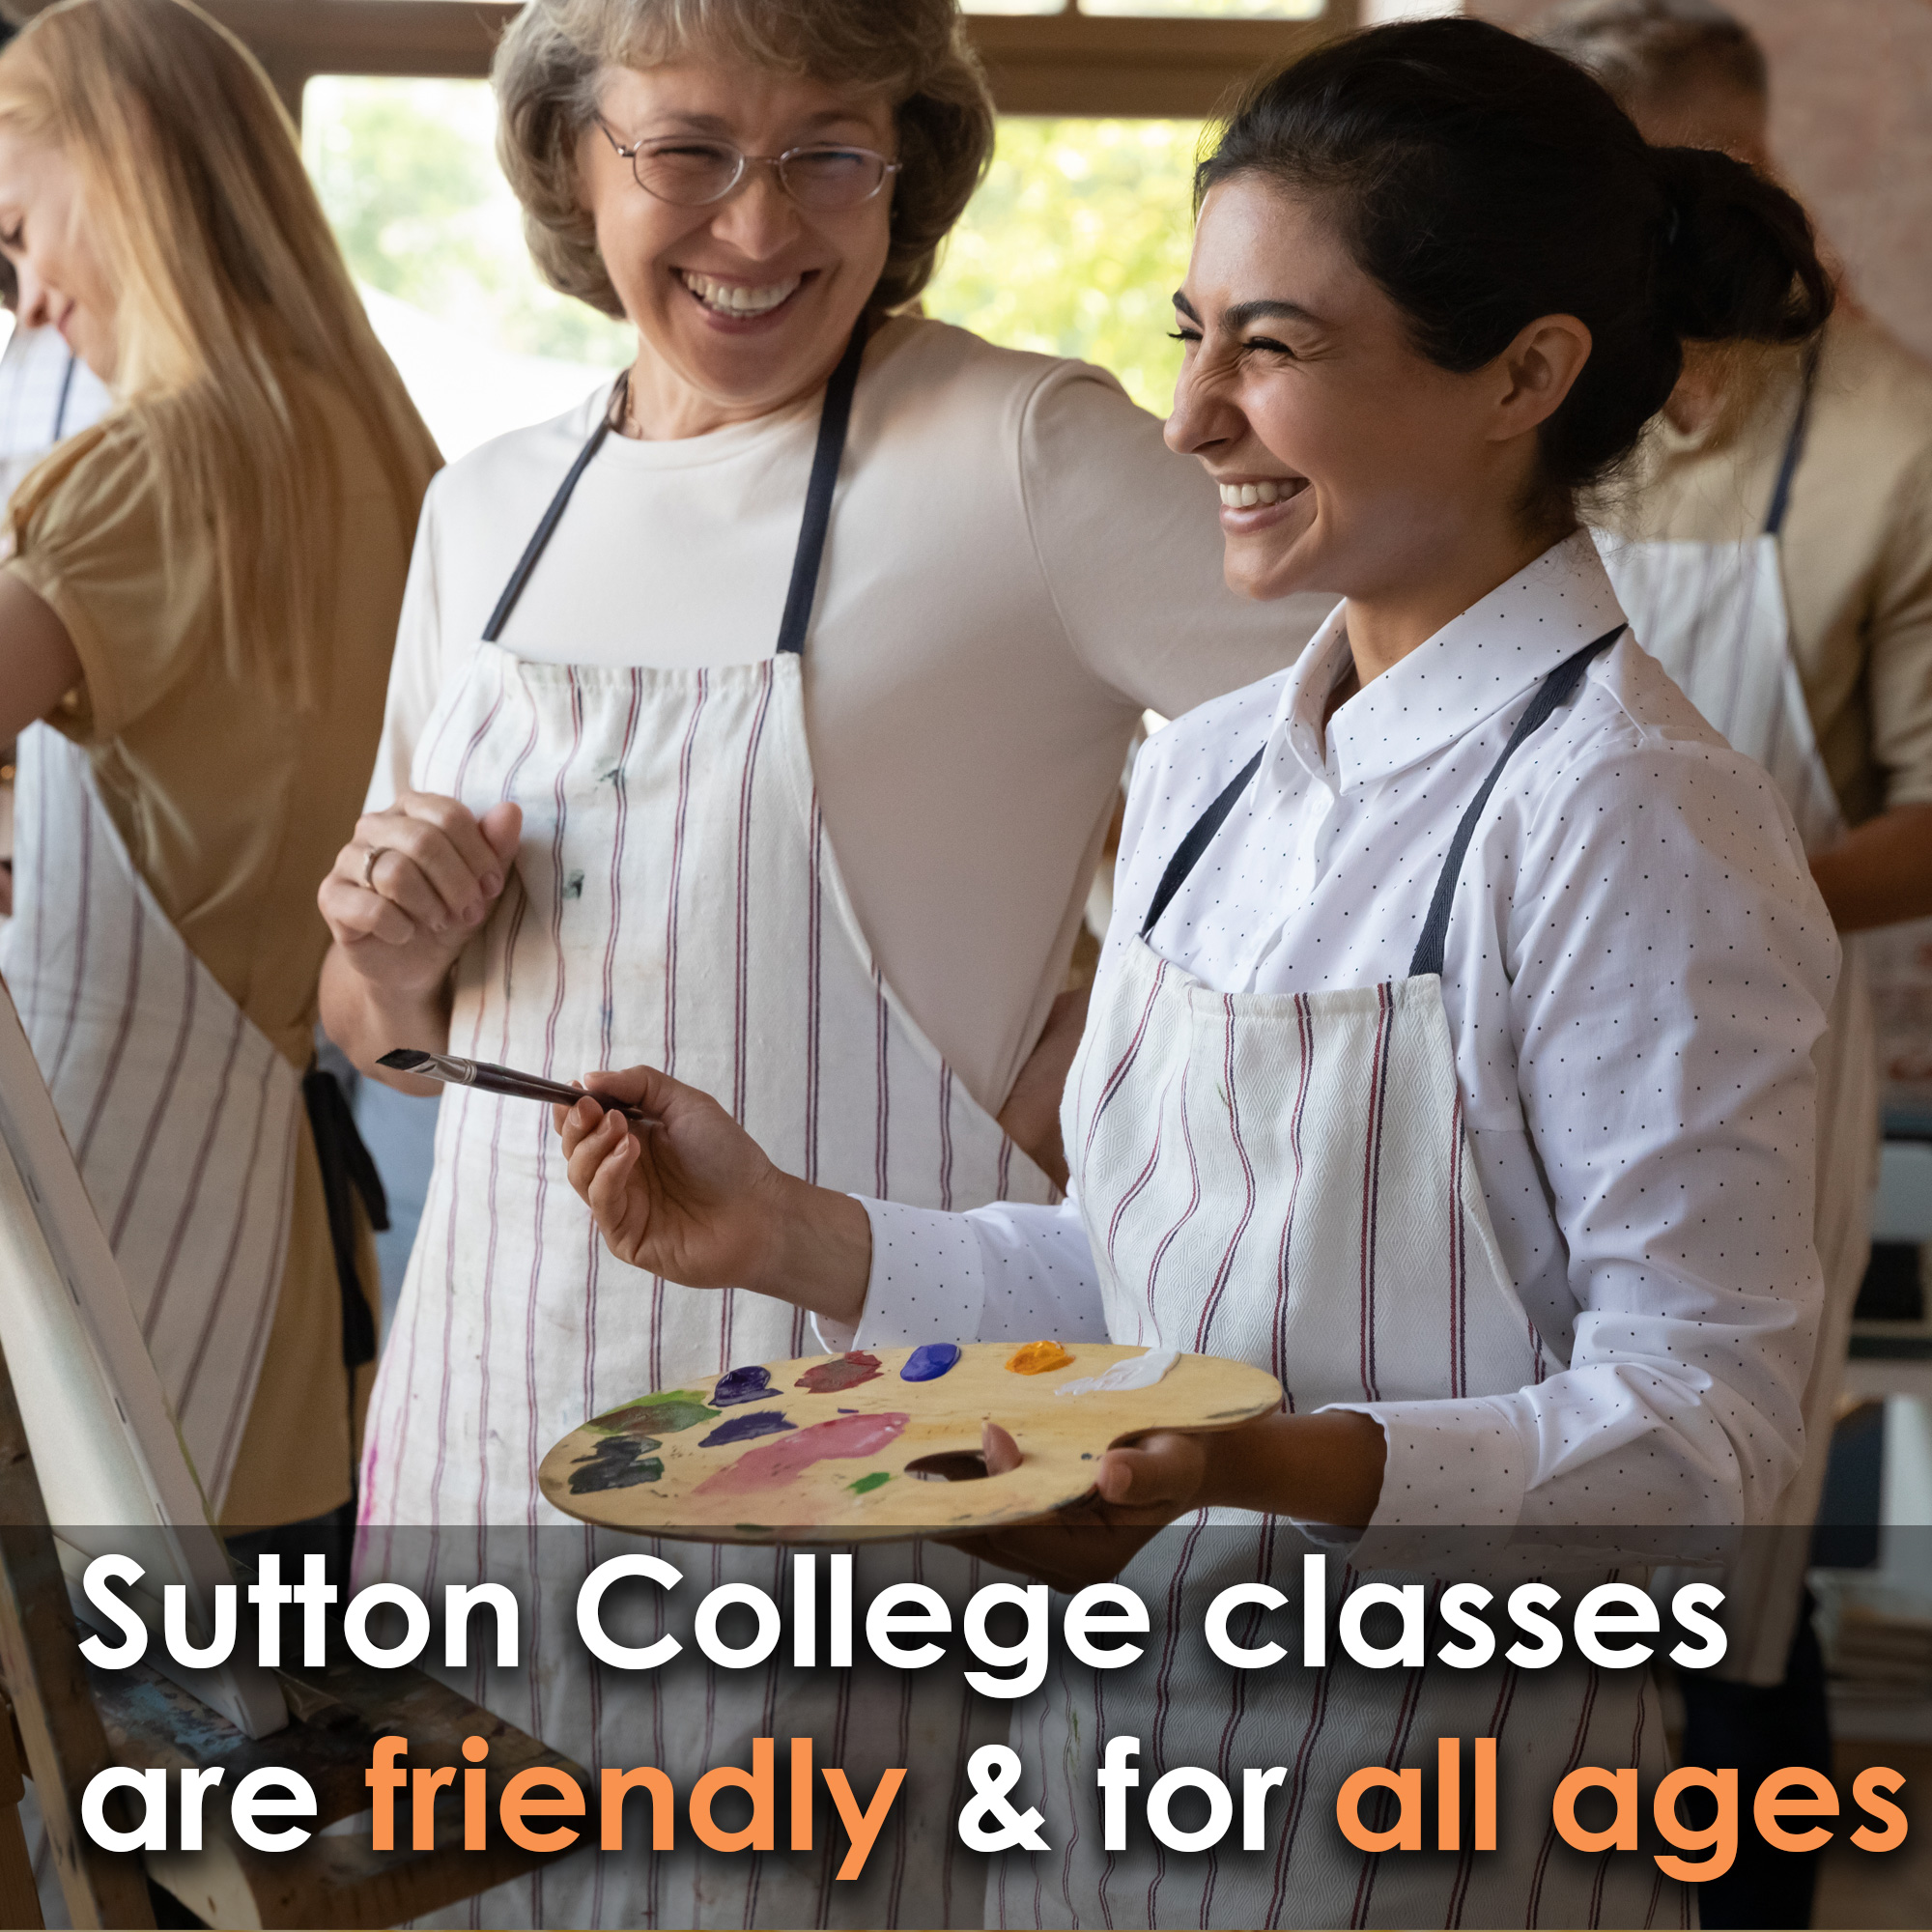 Sutton College classes are friendly and for all ages